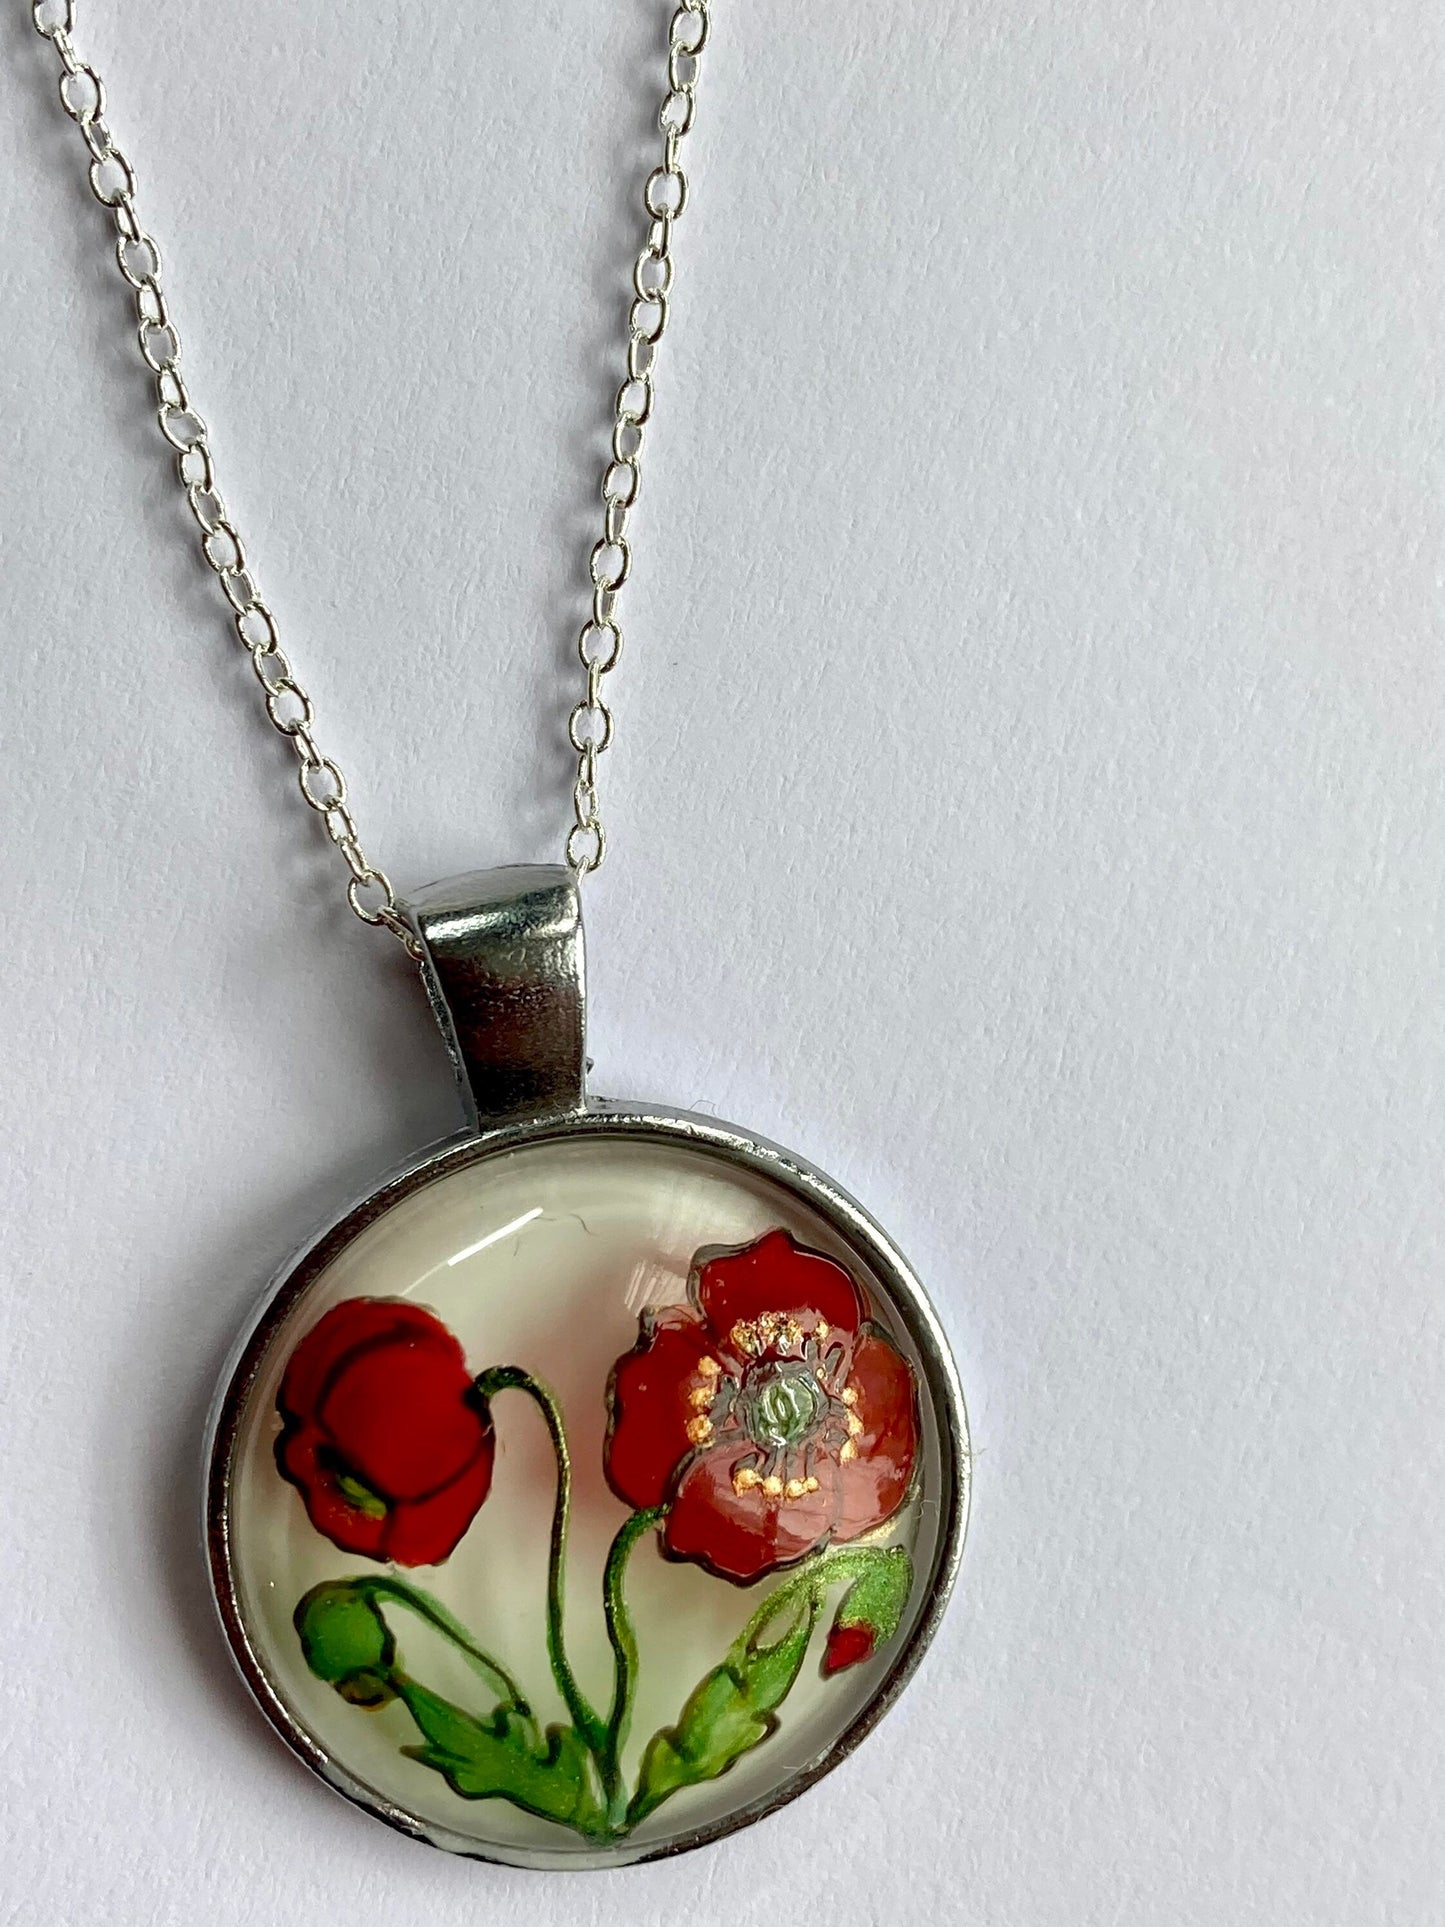 Poppy hand painted glass pendant necklace